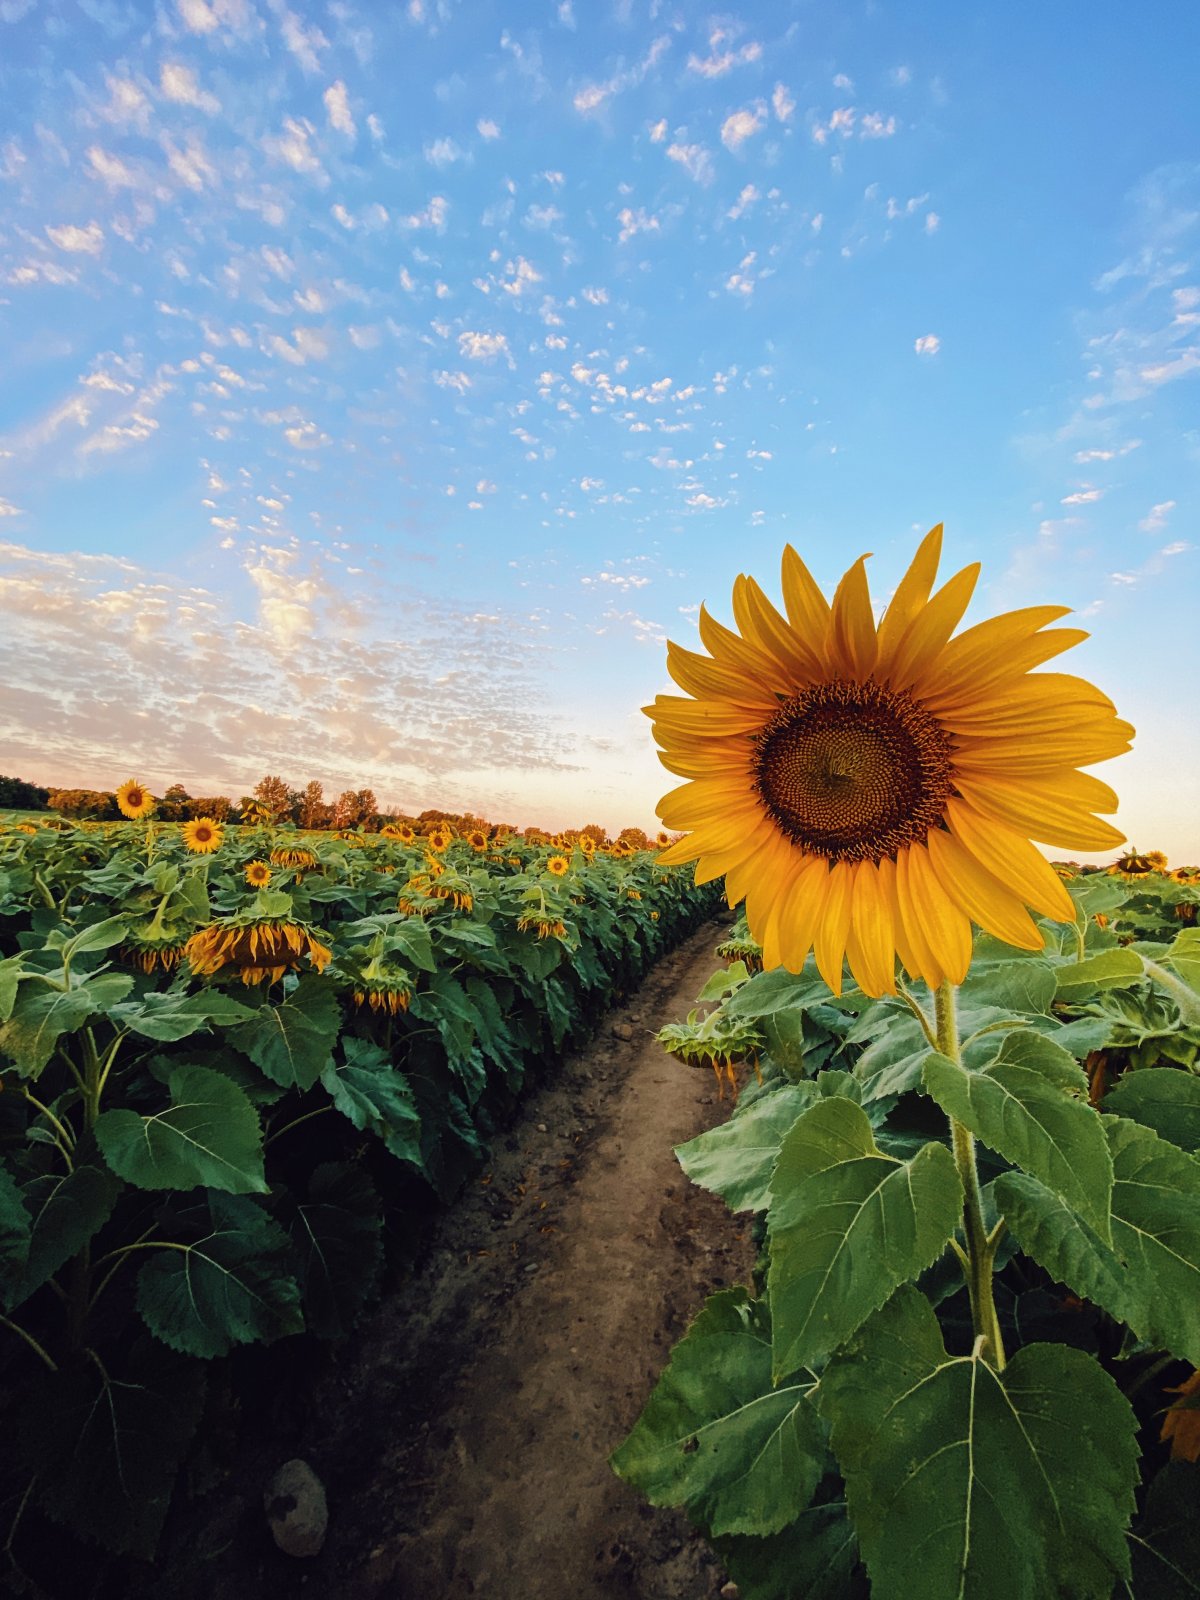 Beautiful sunflower pictures with blue sky and white clouds